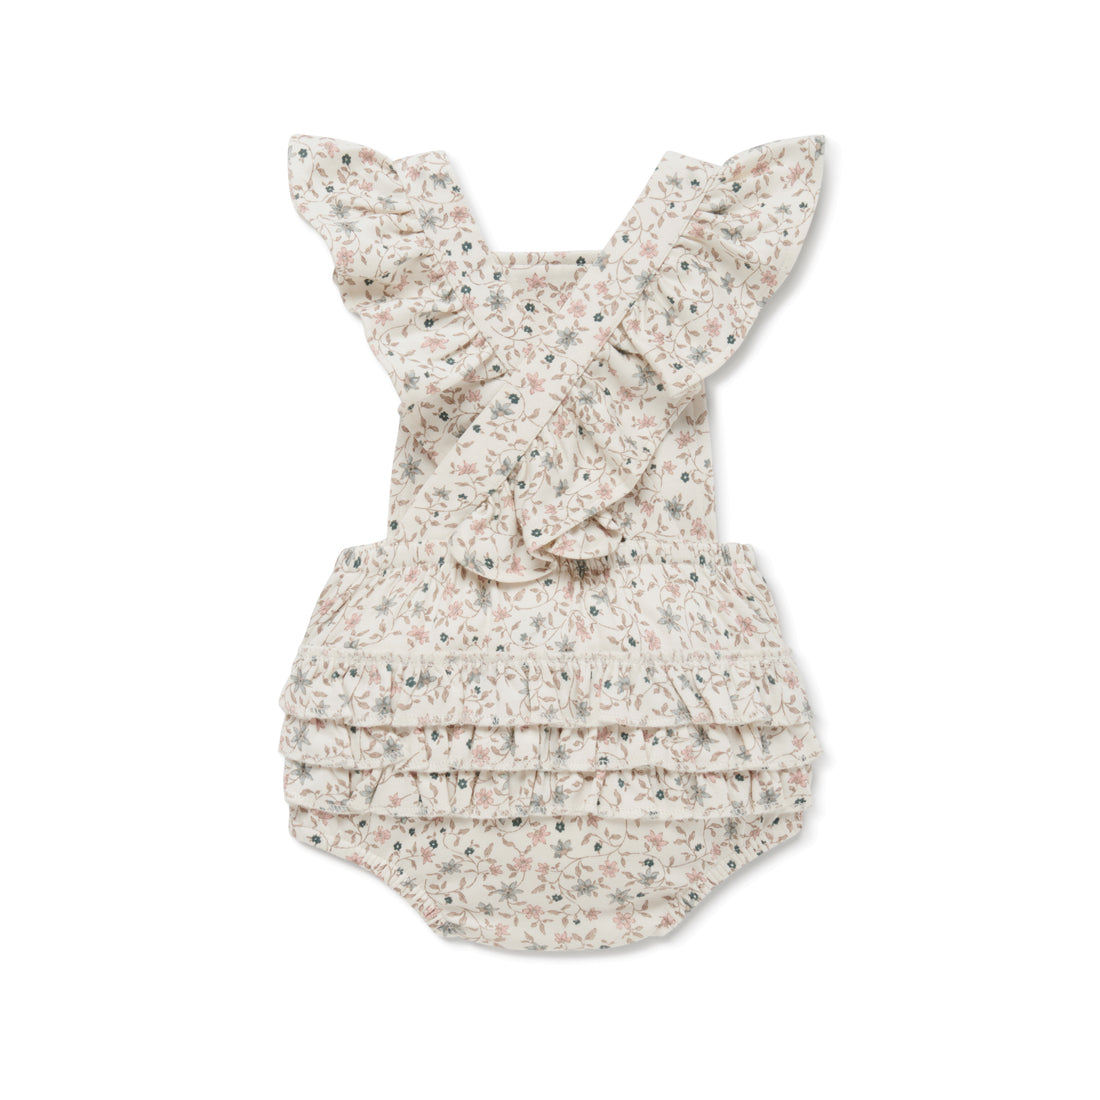 Baby Girl Winter Floral Ruffle Playsuit Lace